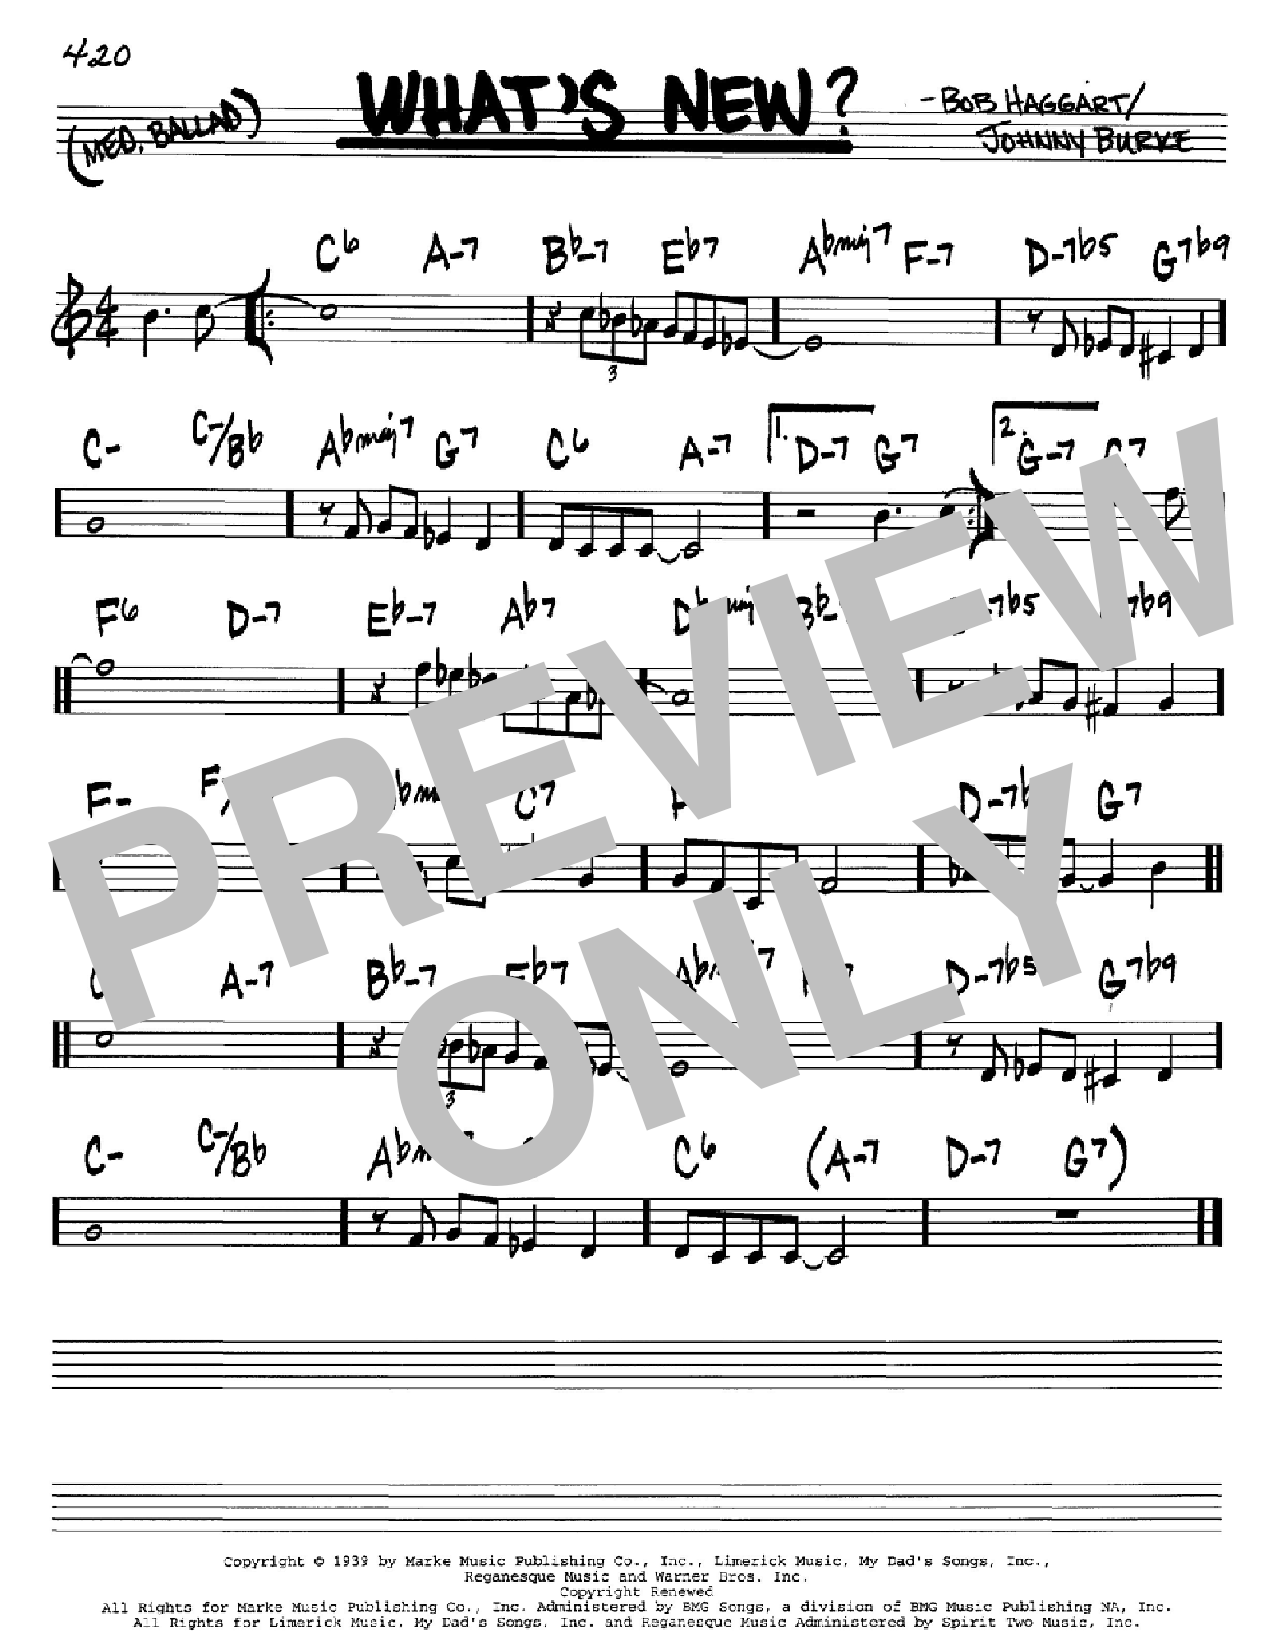 Download Johnny Burke What's New? Sheet Music